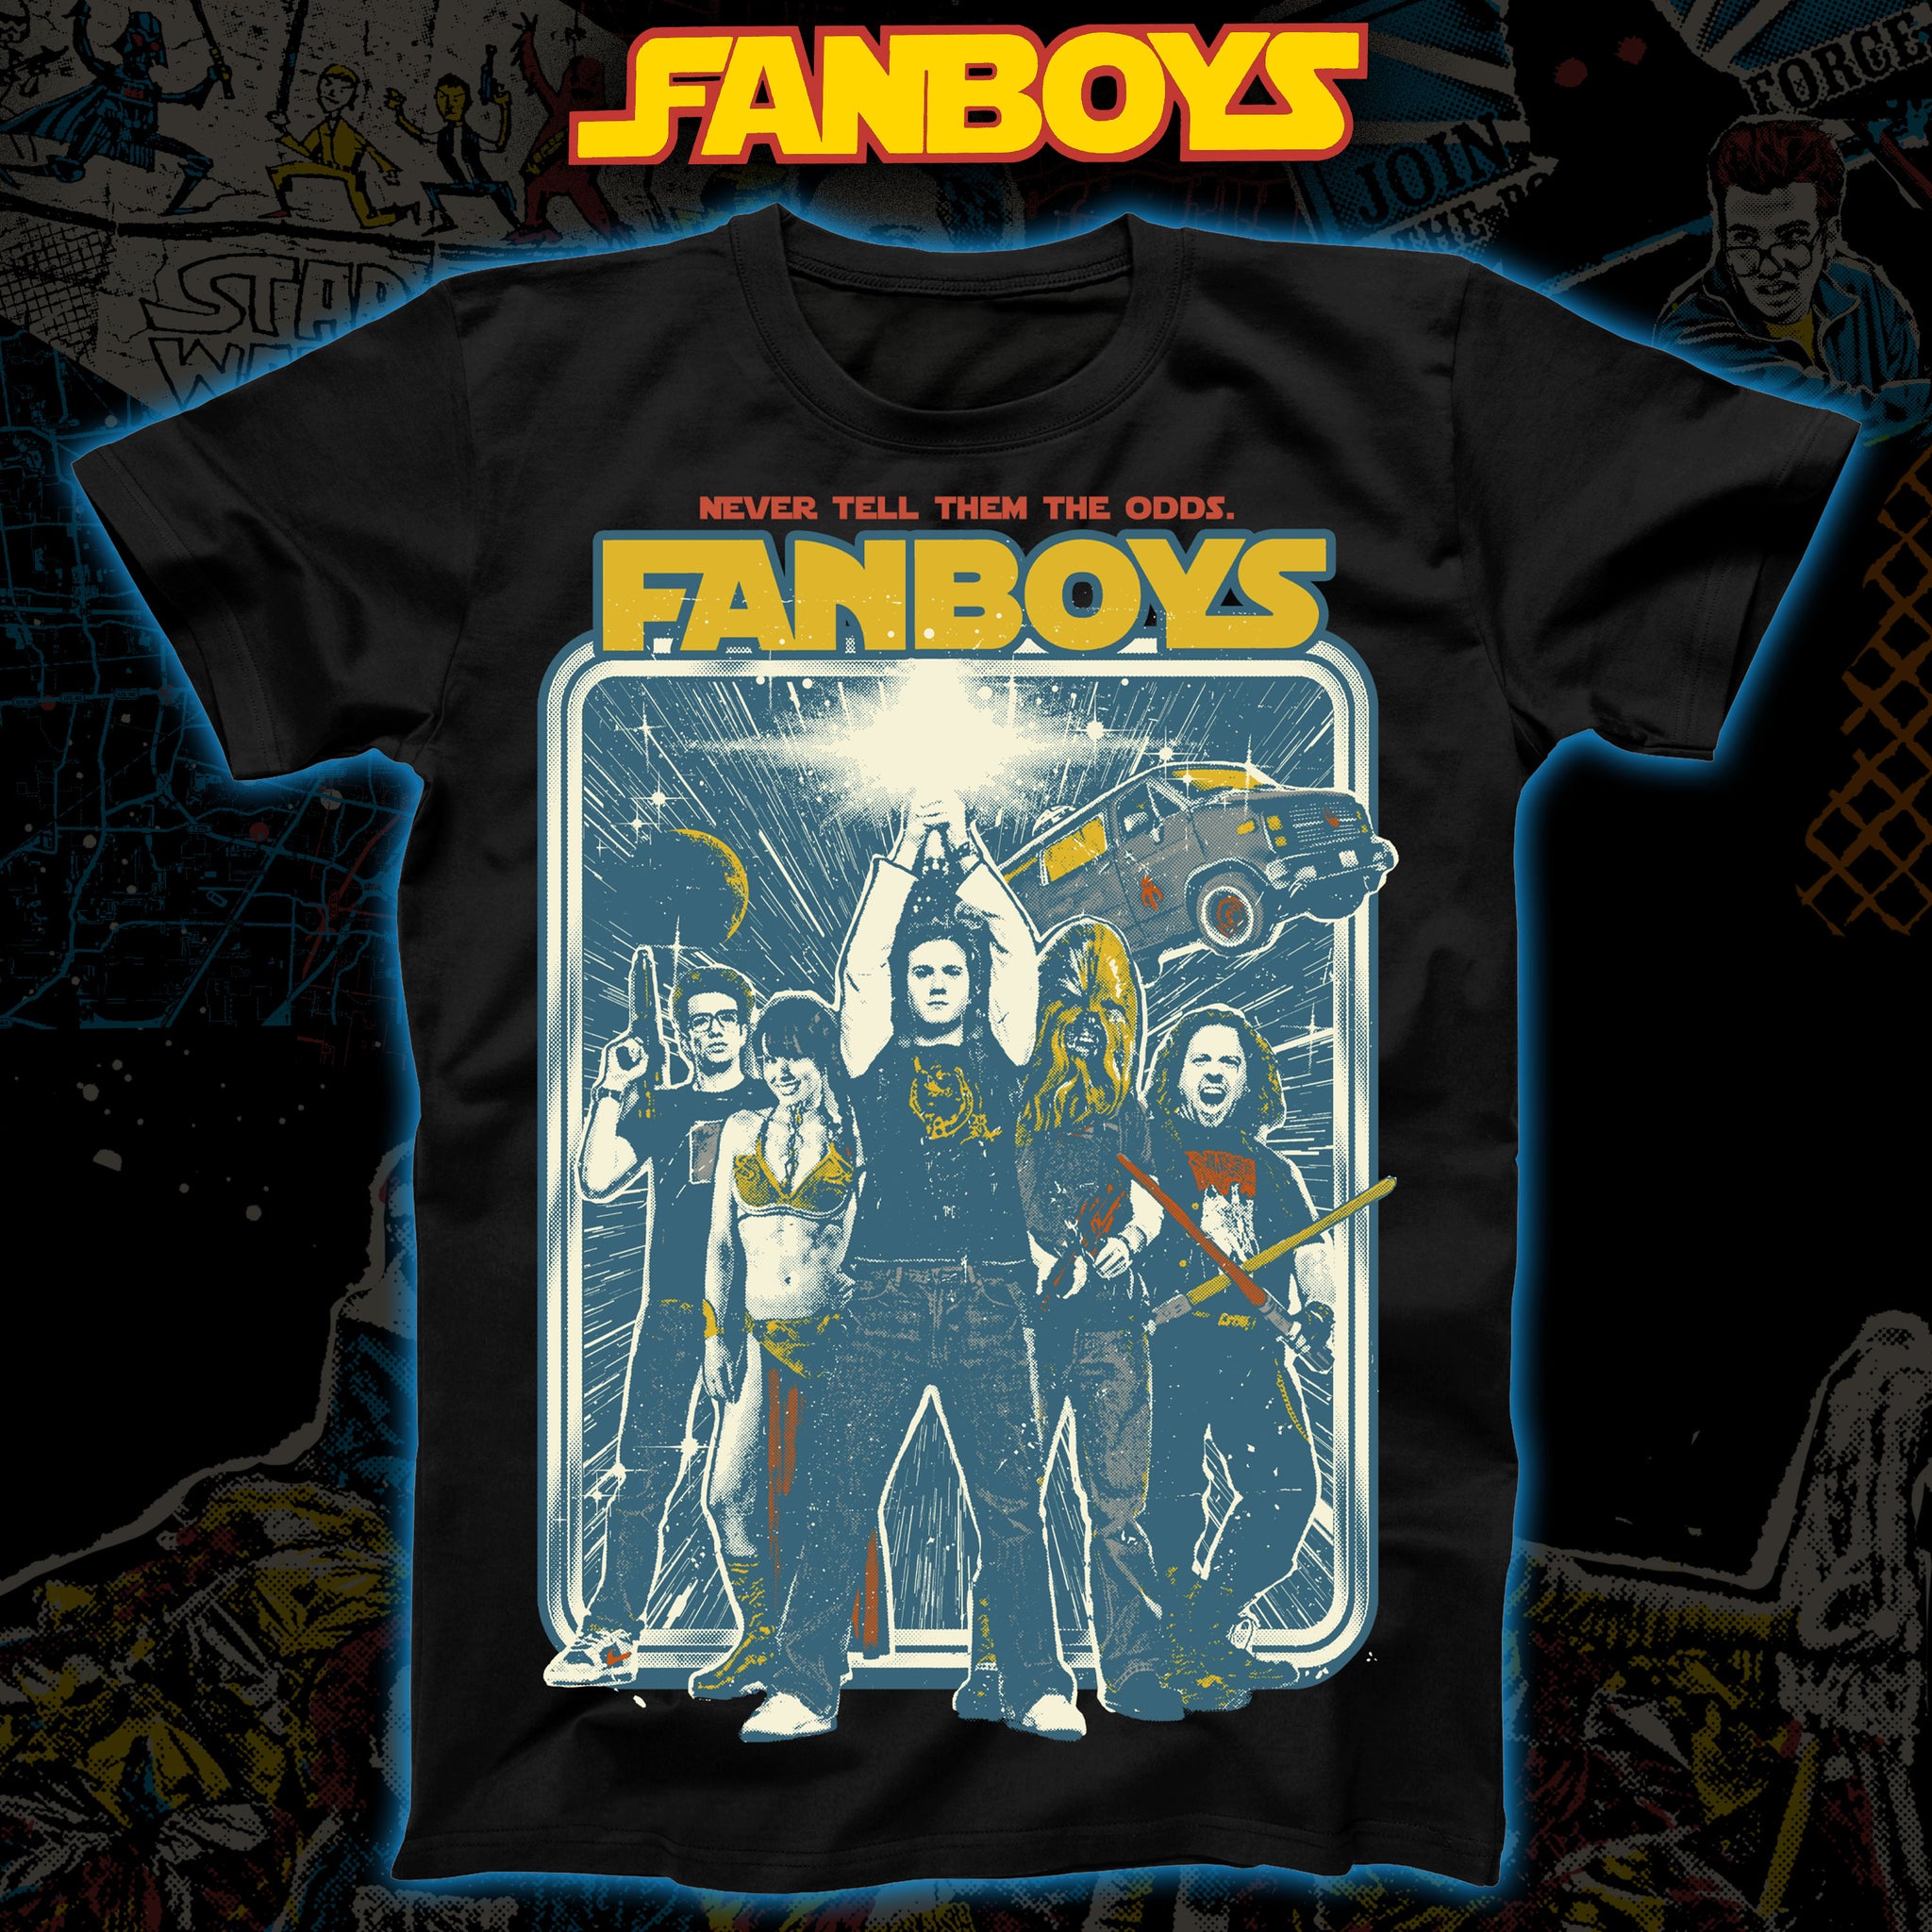 Fanboys "Conquest for the Ages" Regular tee